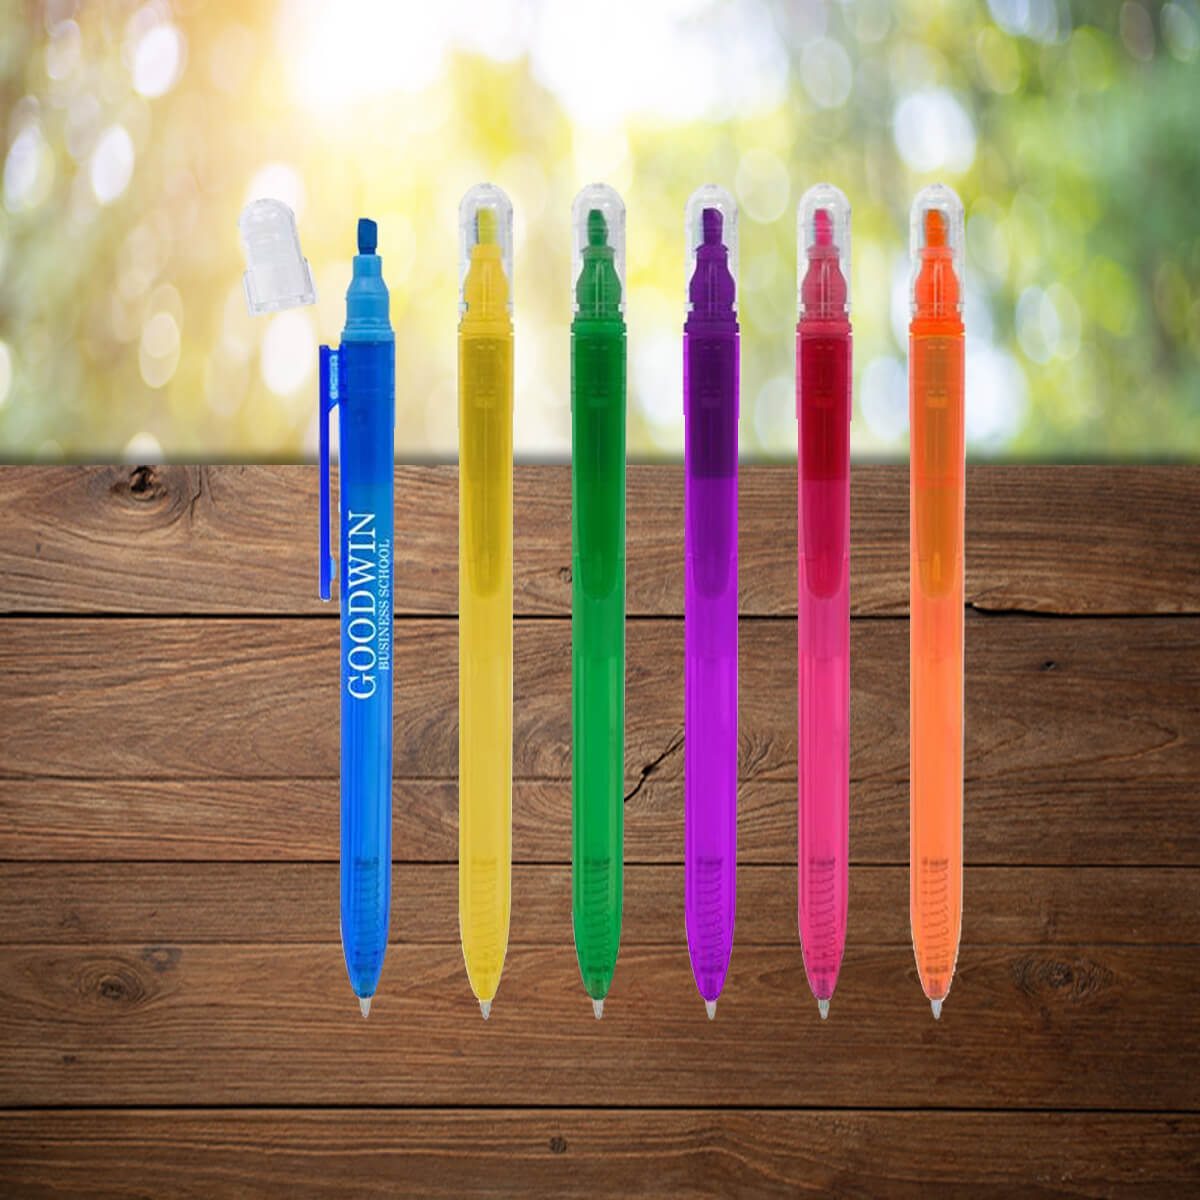 Clear capped dual highlighter pen and colors with branding promotional writing implements by curative printing